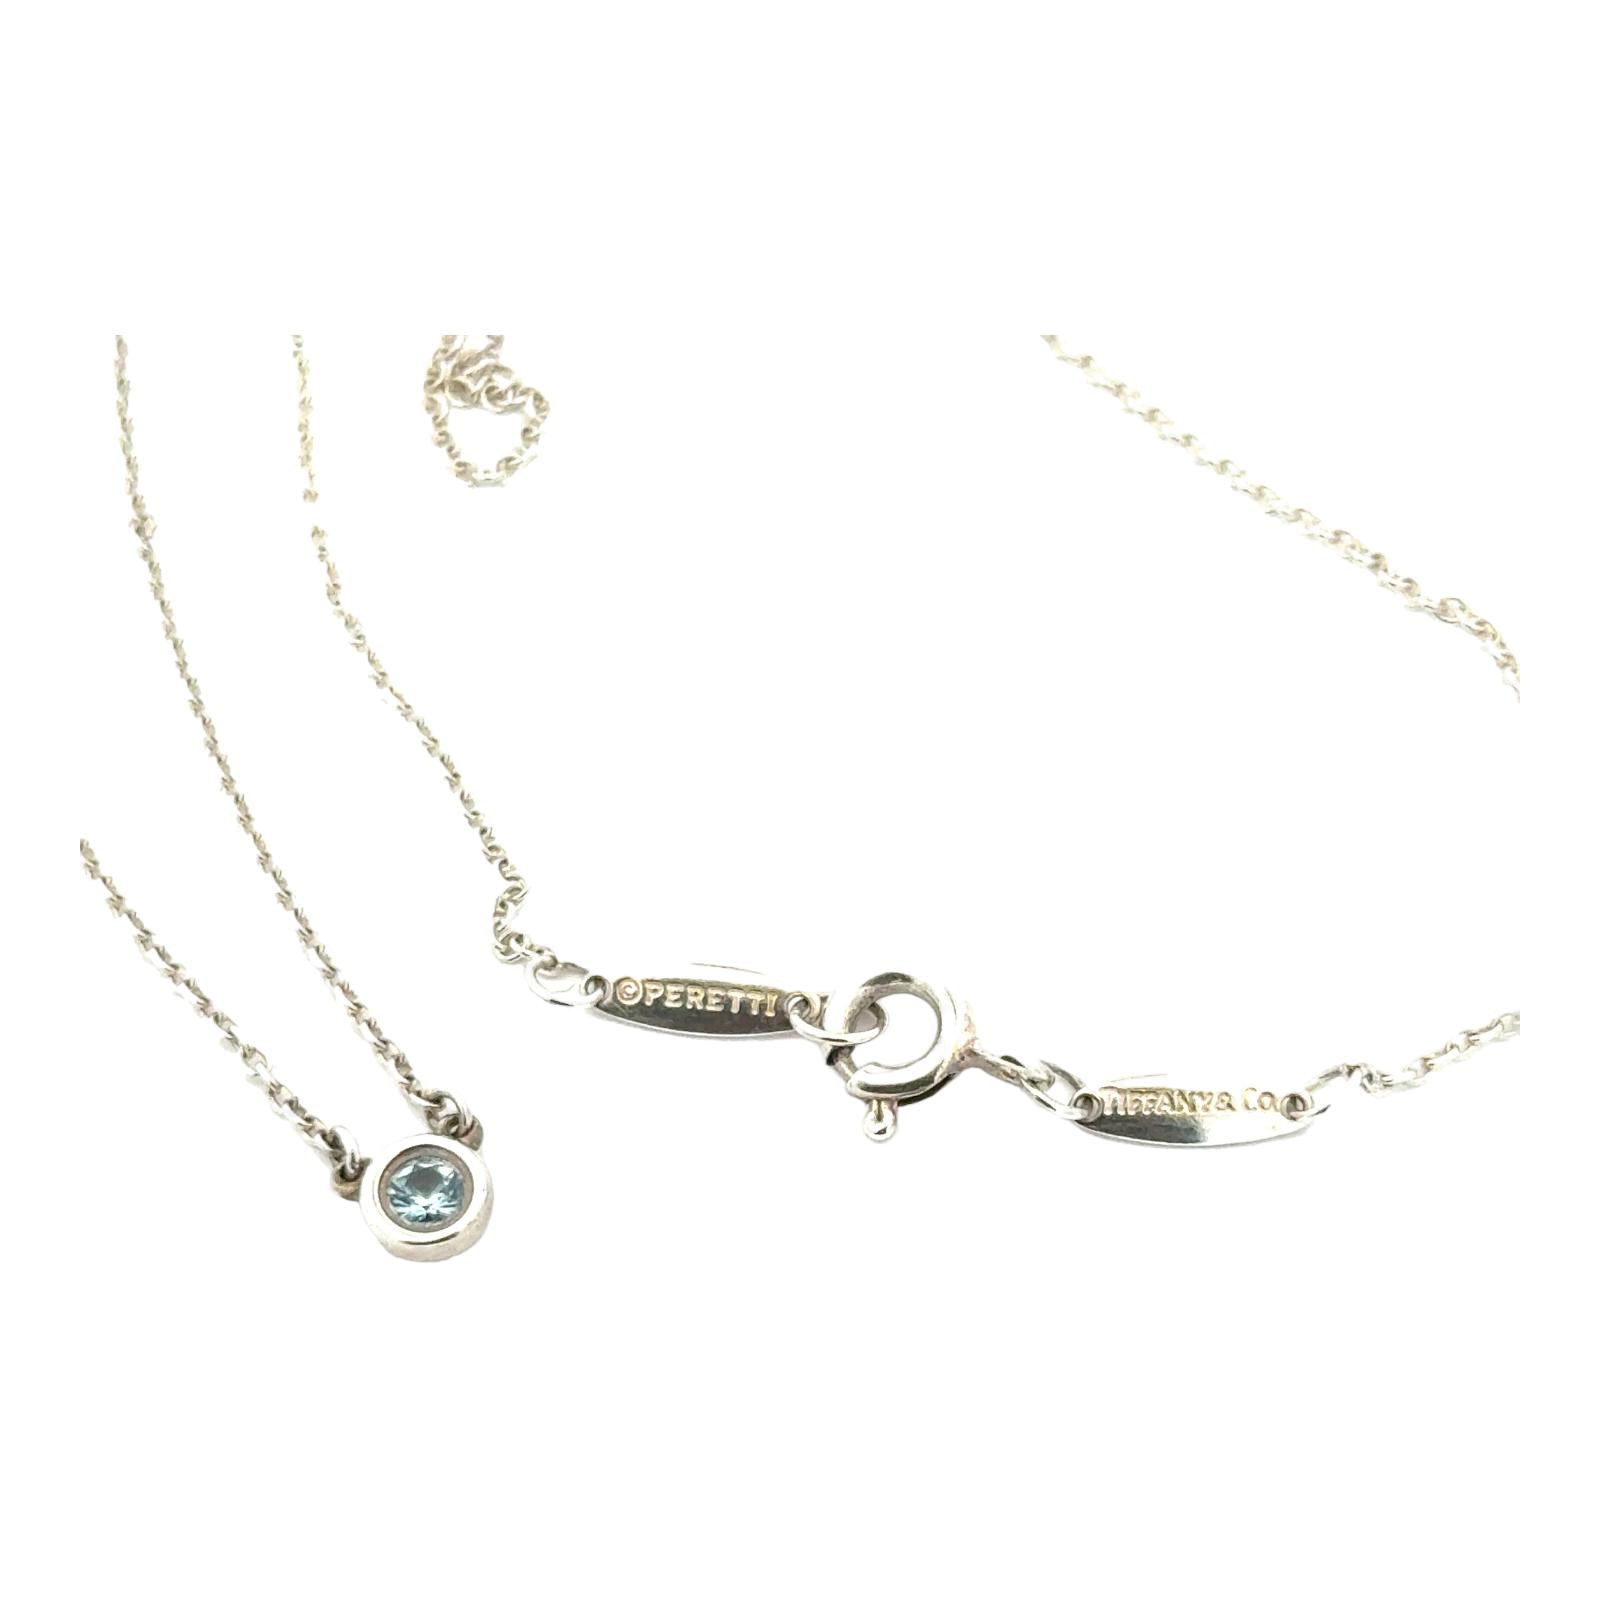 Tiffany & Co. Aquamarine and Sapphire Necklace by Paloma Picasso